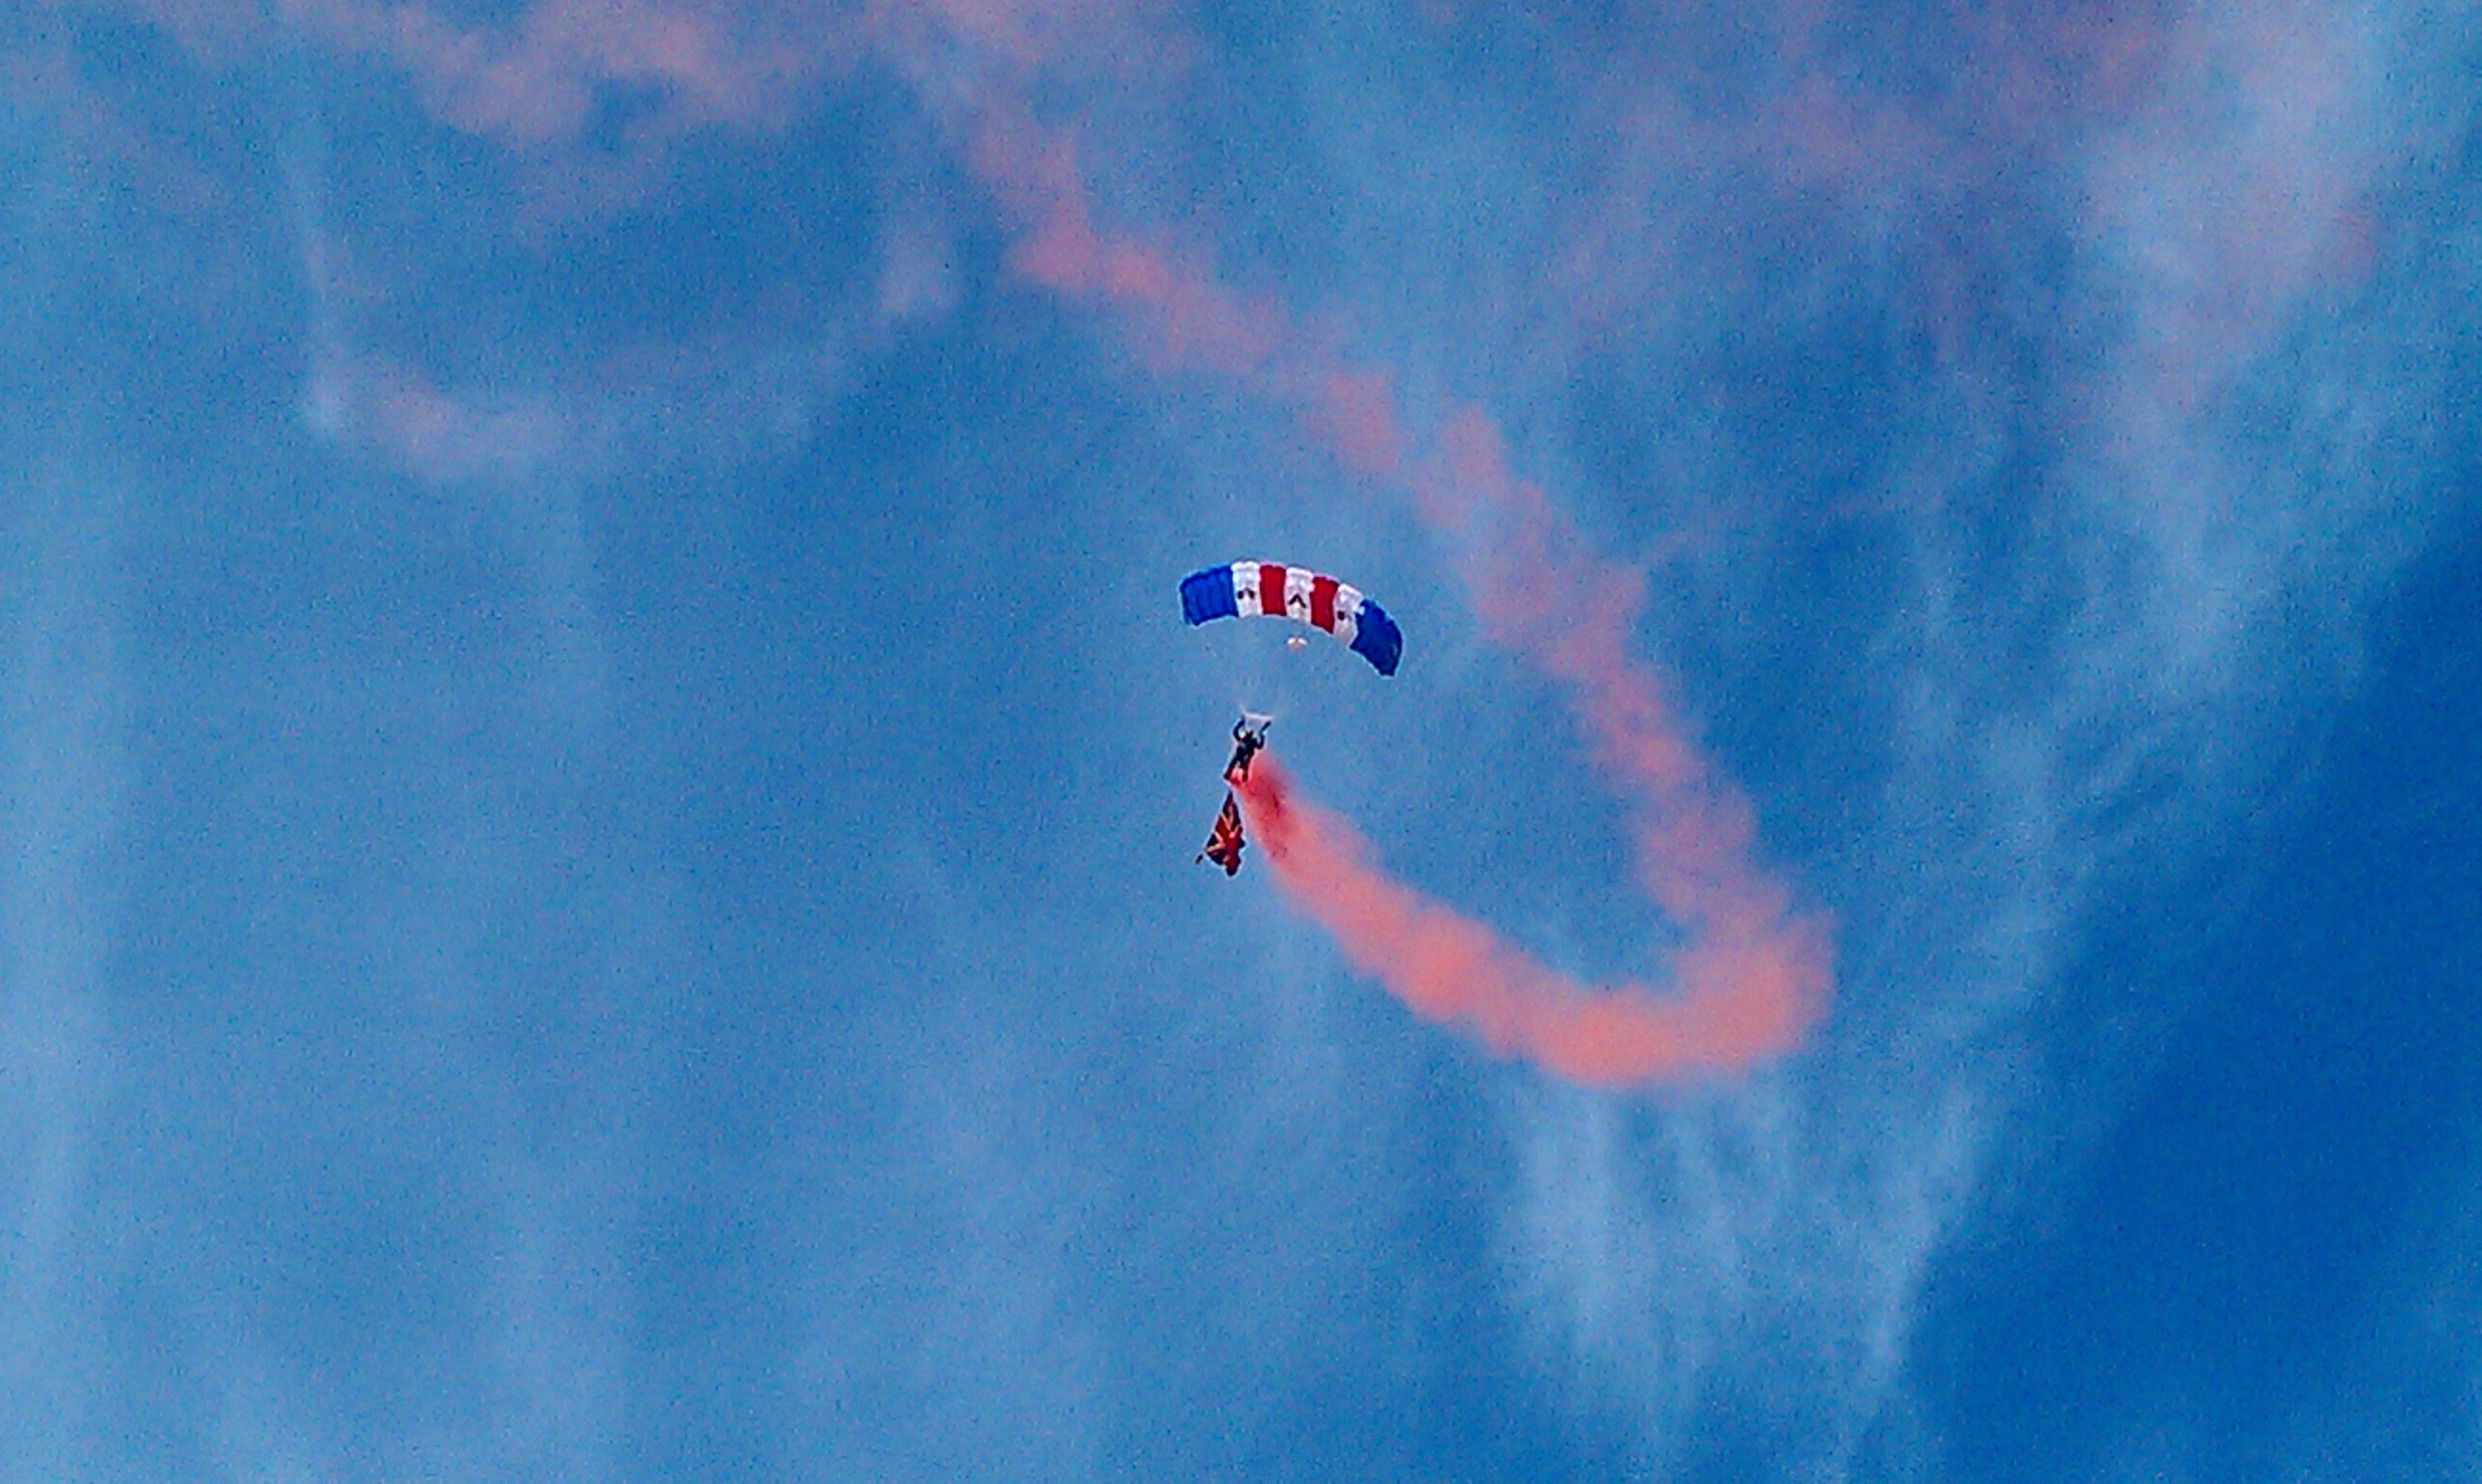 In comes the first parachutist